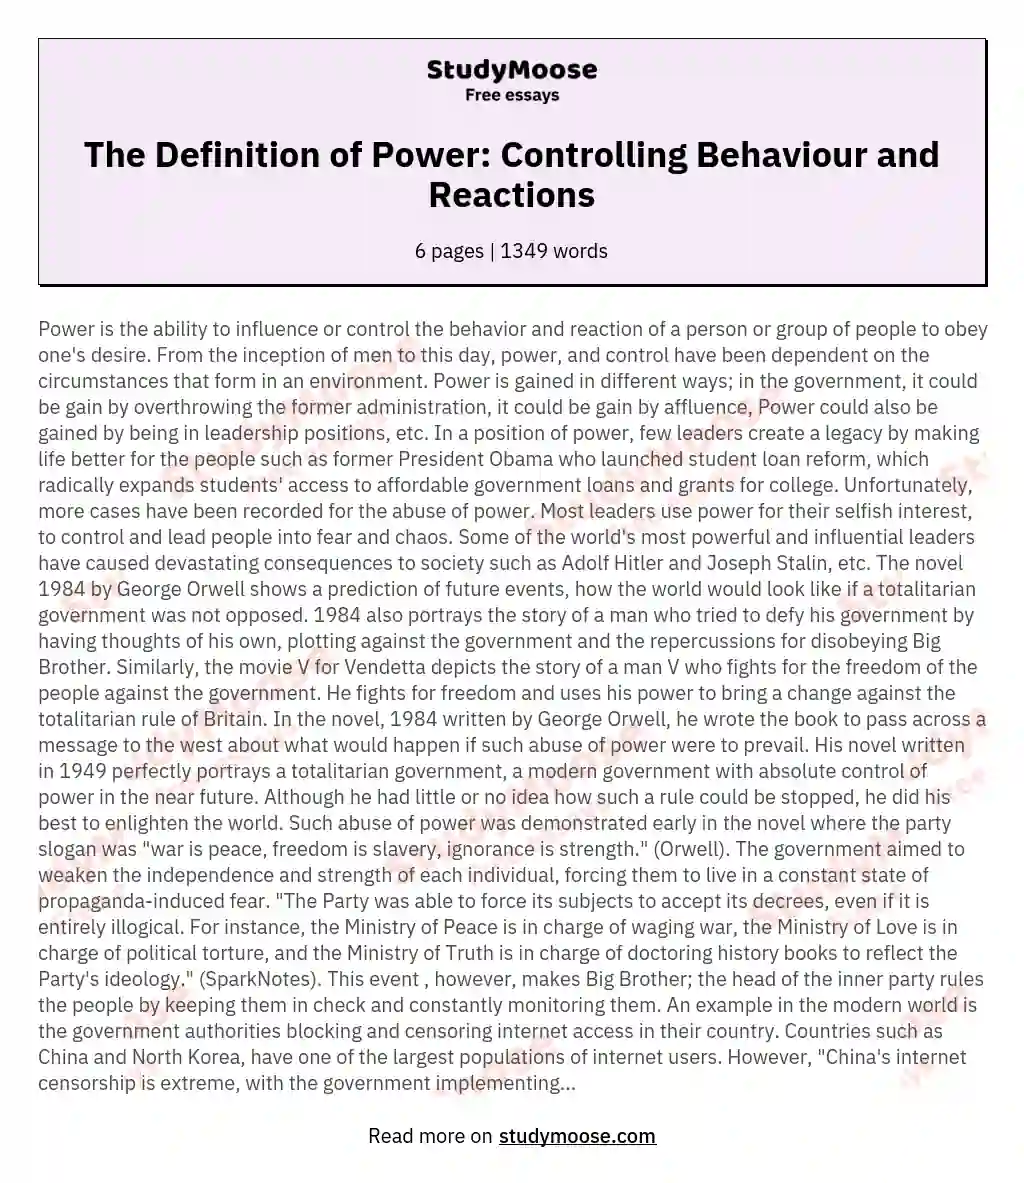 The Definition of Power: Controlling Behaviour and Reactions essay